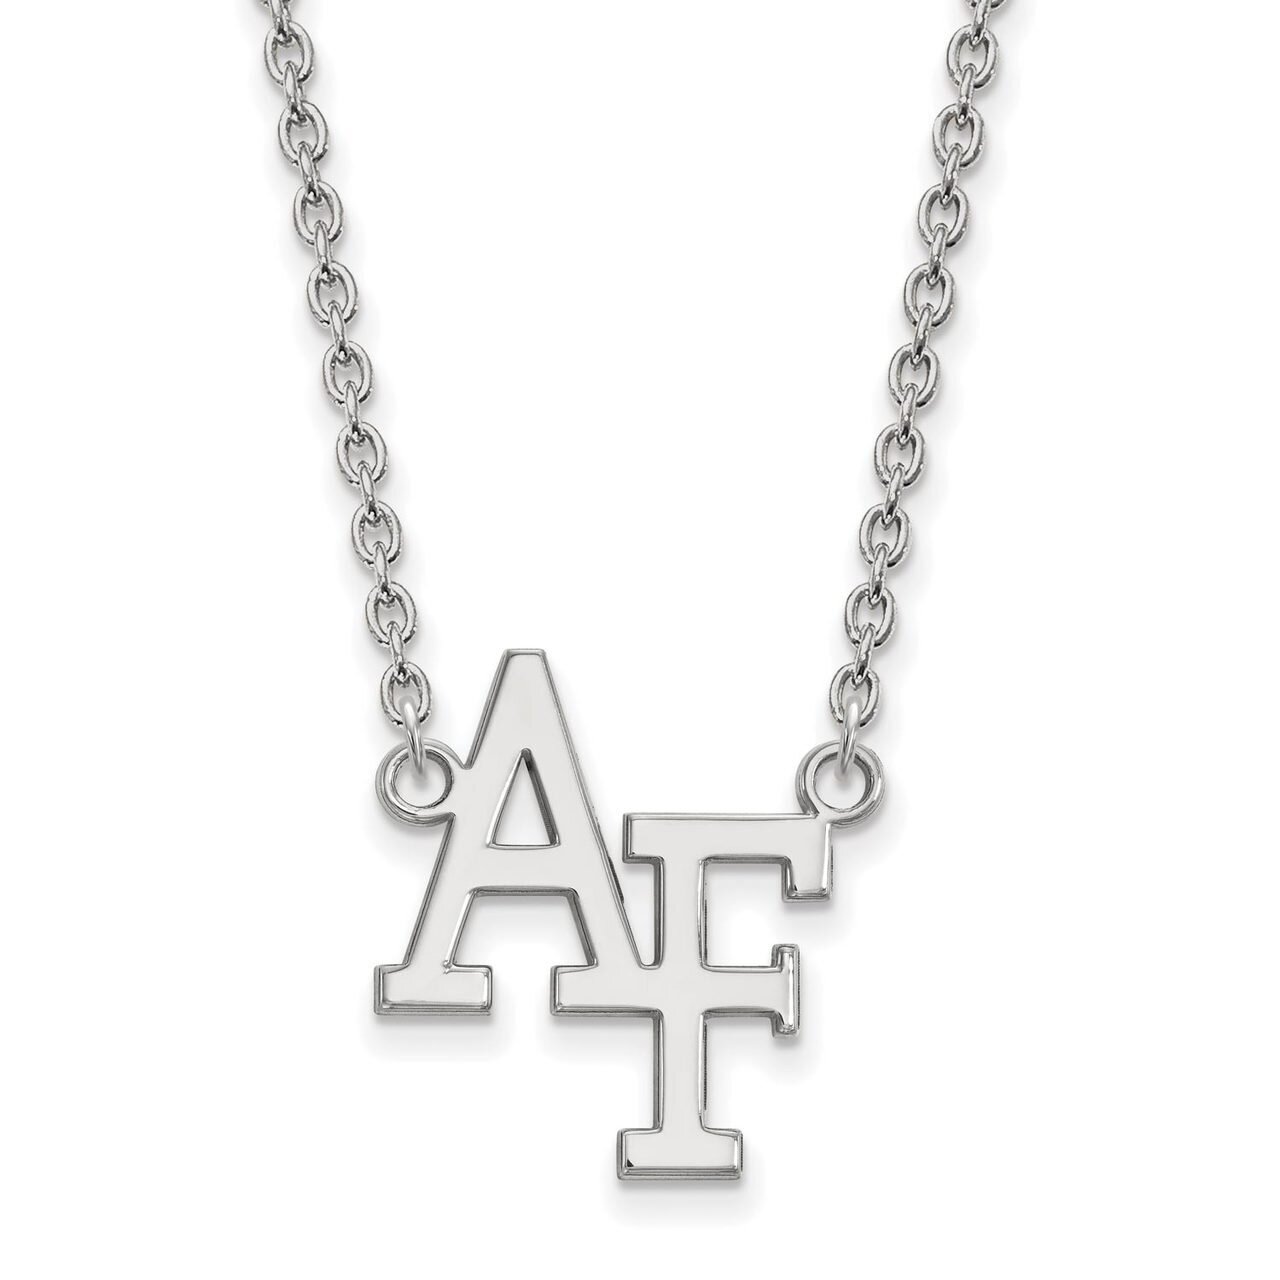 United States Air Force Academy Large Pendant with Chain Necklace 14k White Gold 4W012USA-18